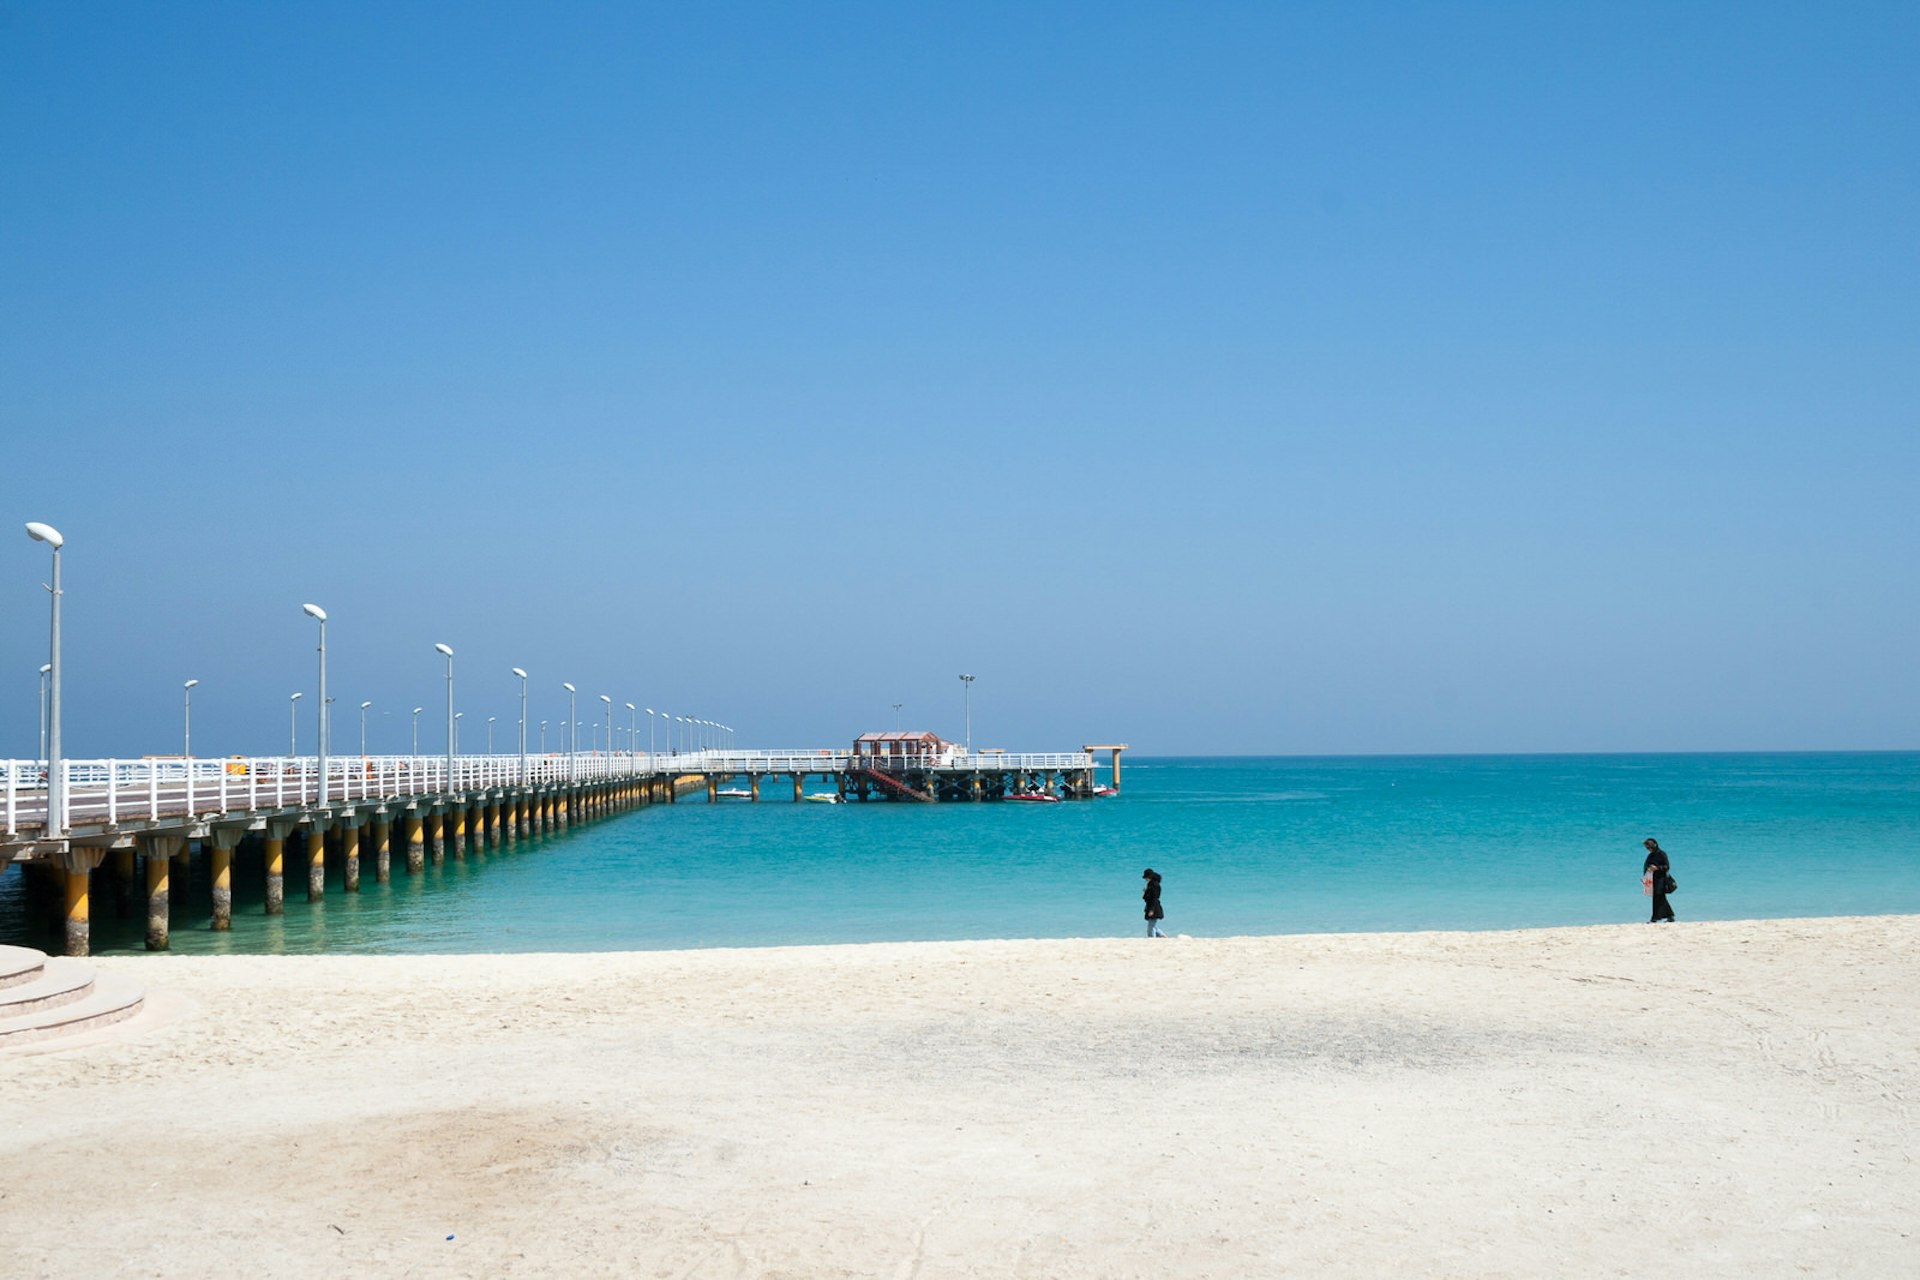 The Grand Recreational Pier of Kish Island, Iran, jutting from the sandy beach area into the azure-blue waters of the Gulf 